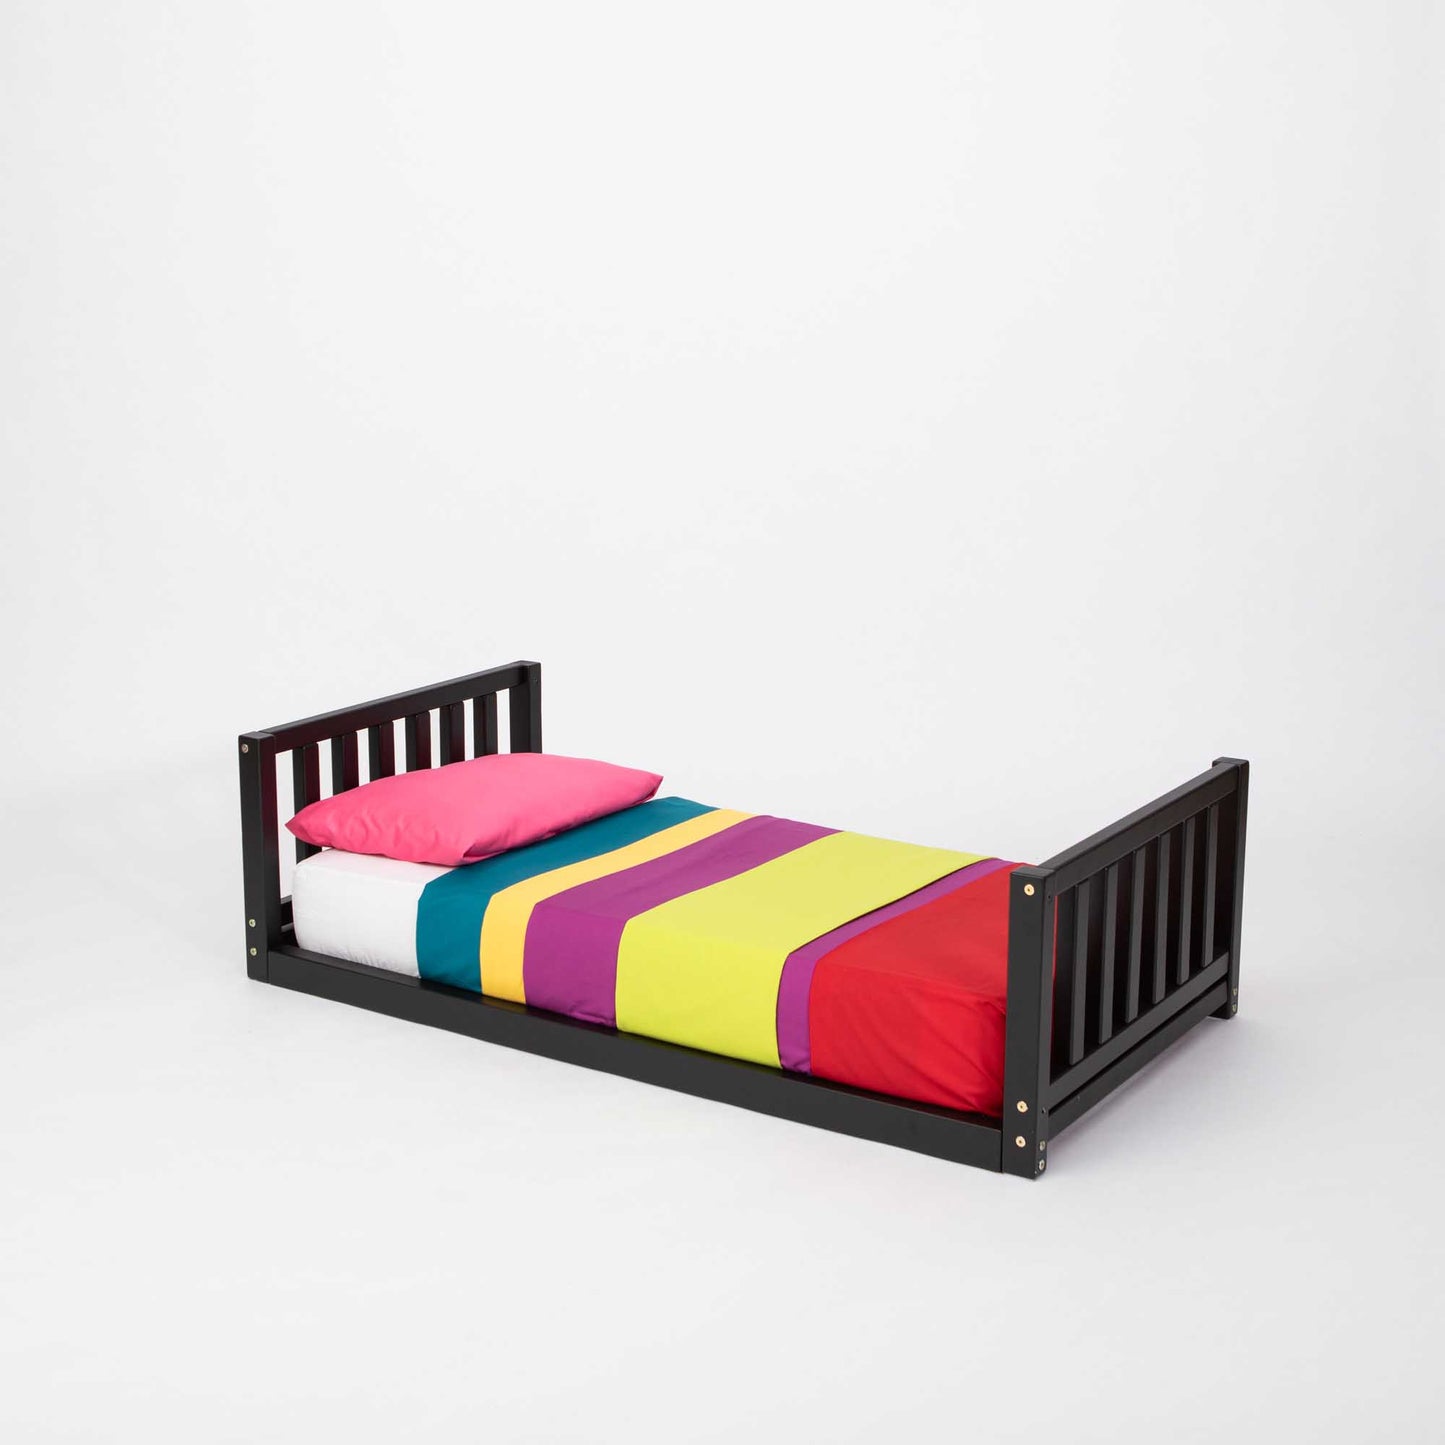 A 2-in-1 kid's bed on legs with a vertical rail headboard and footboard.